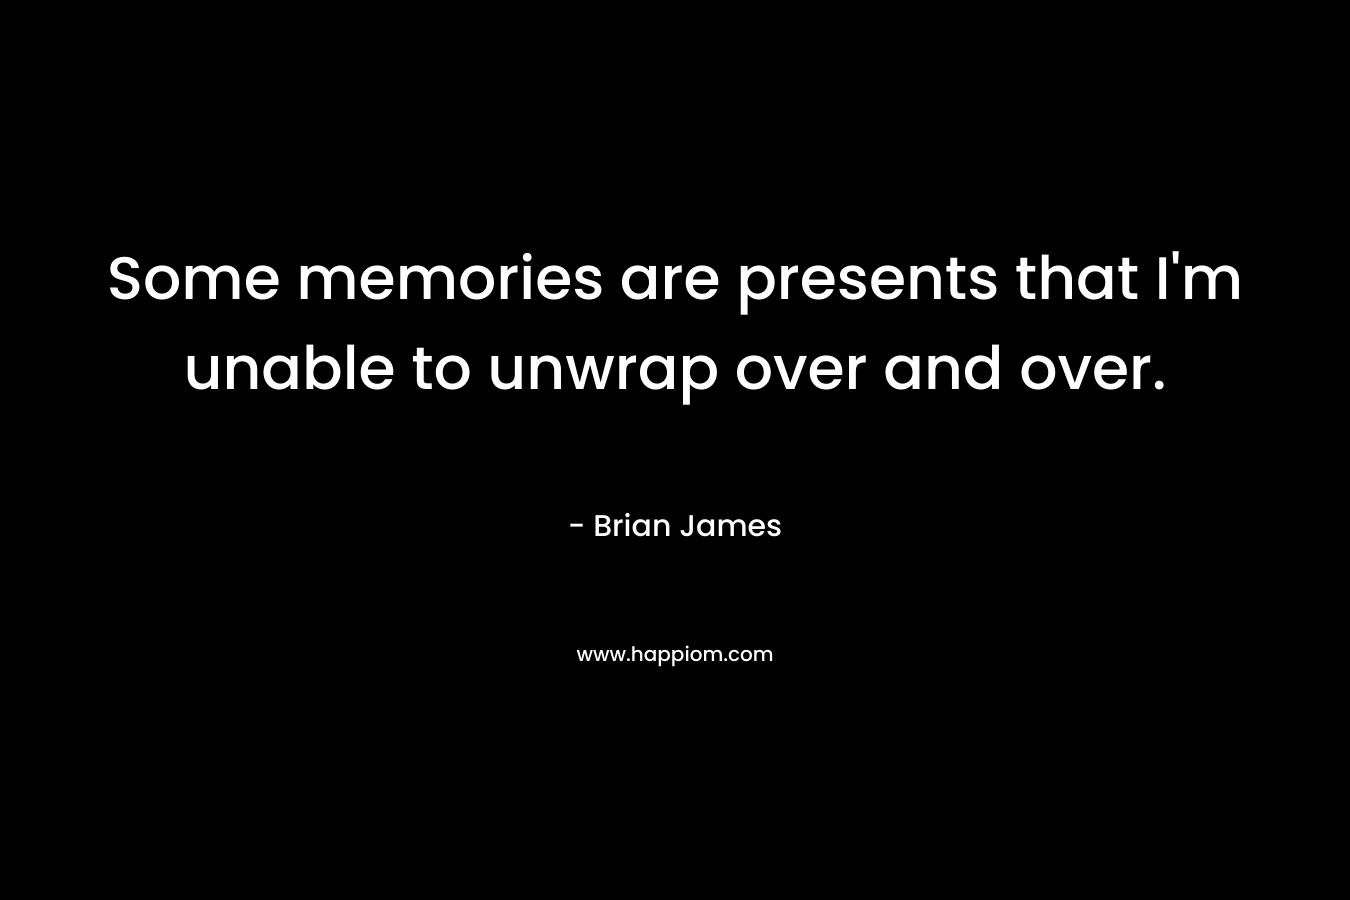 Some memories are presents that I'm unable to unwrap over and over.